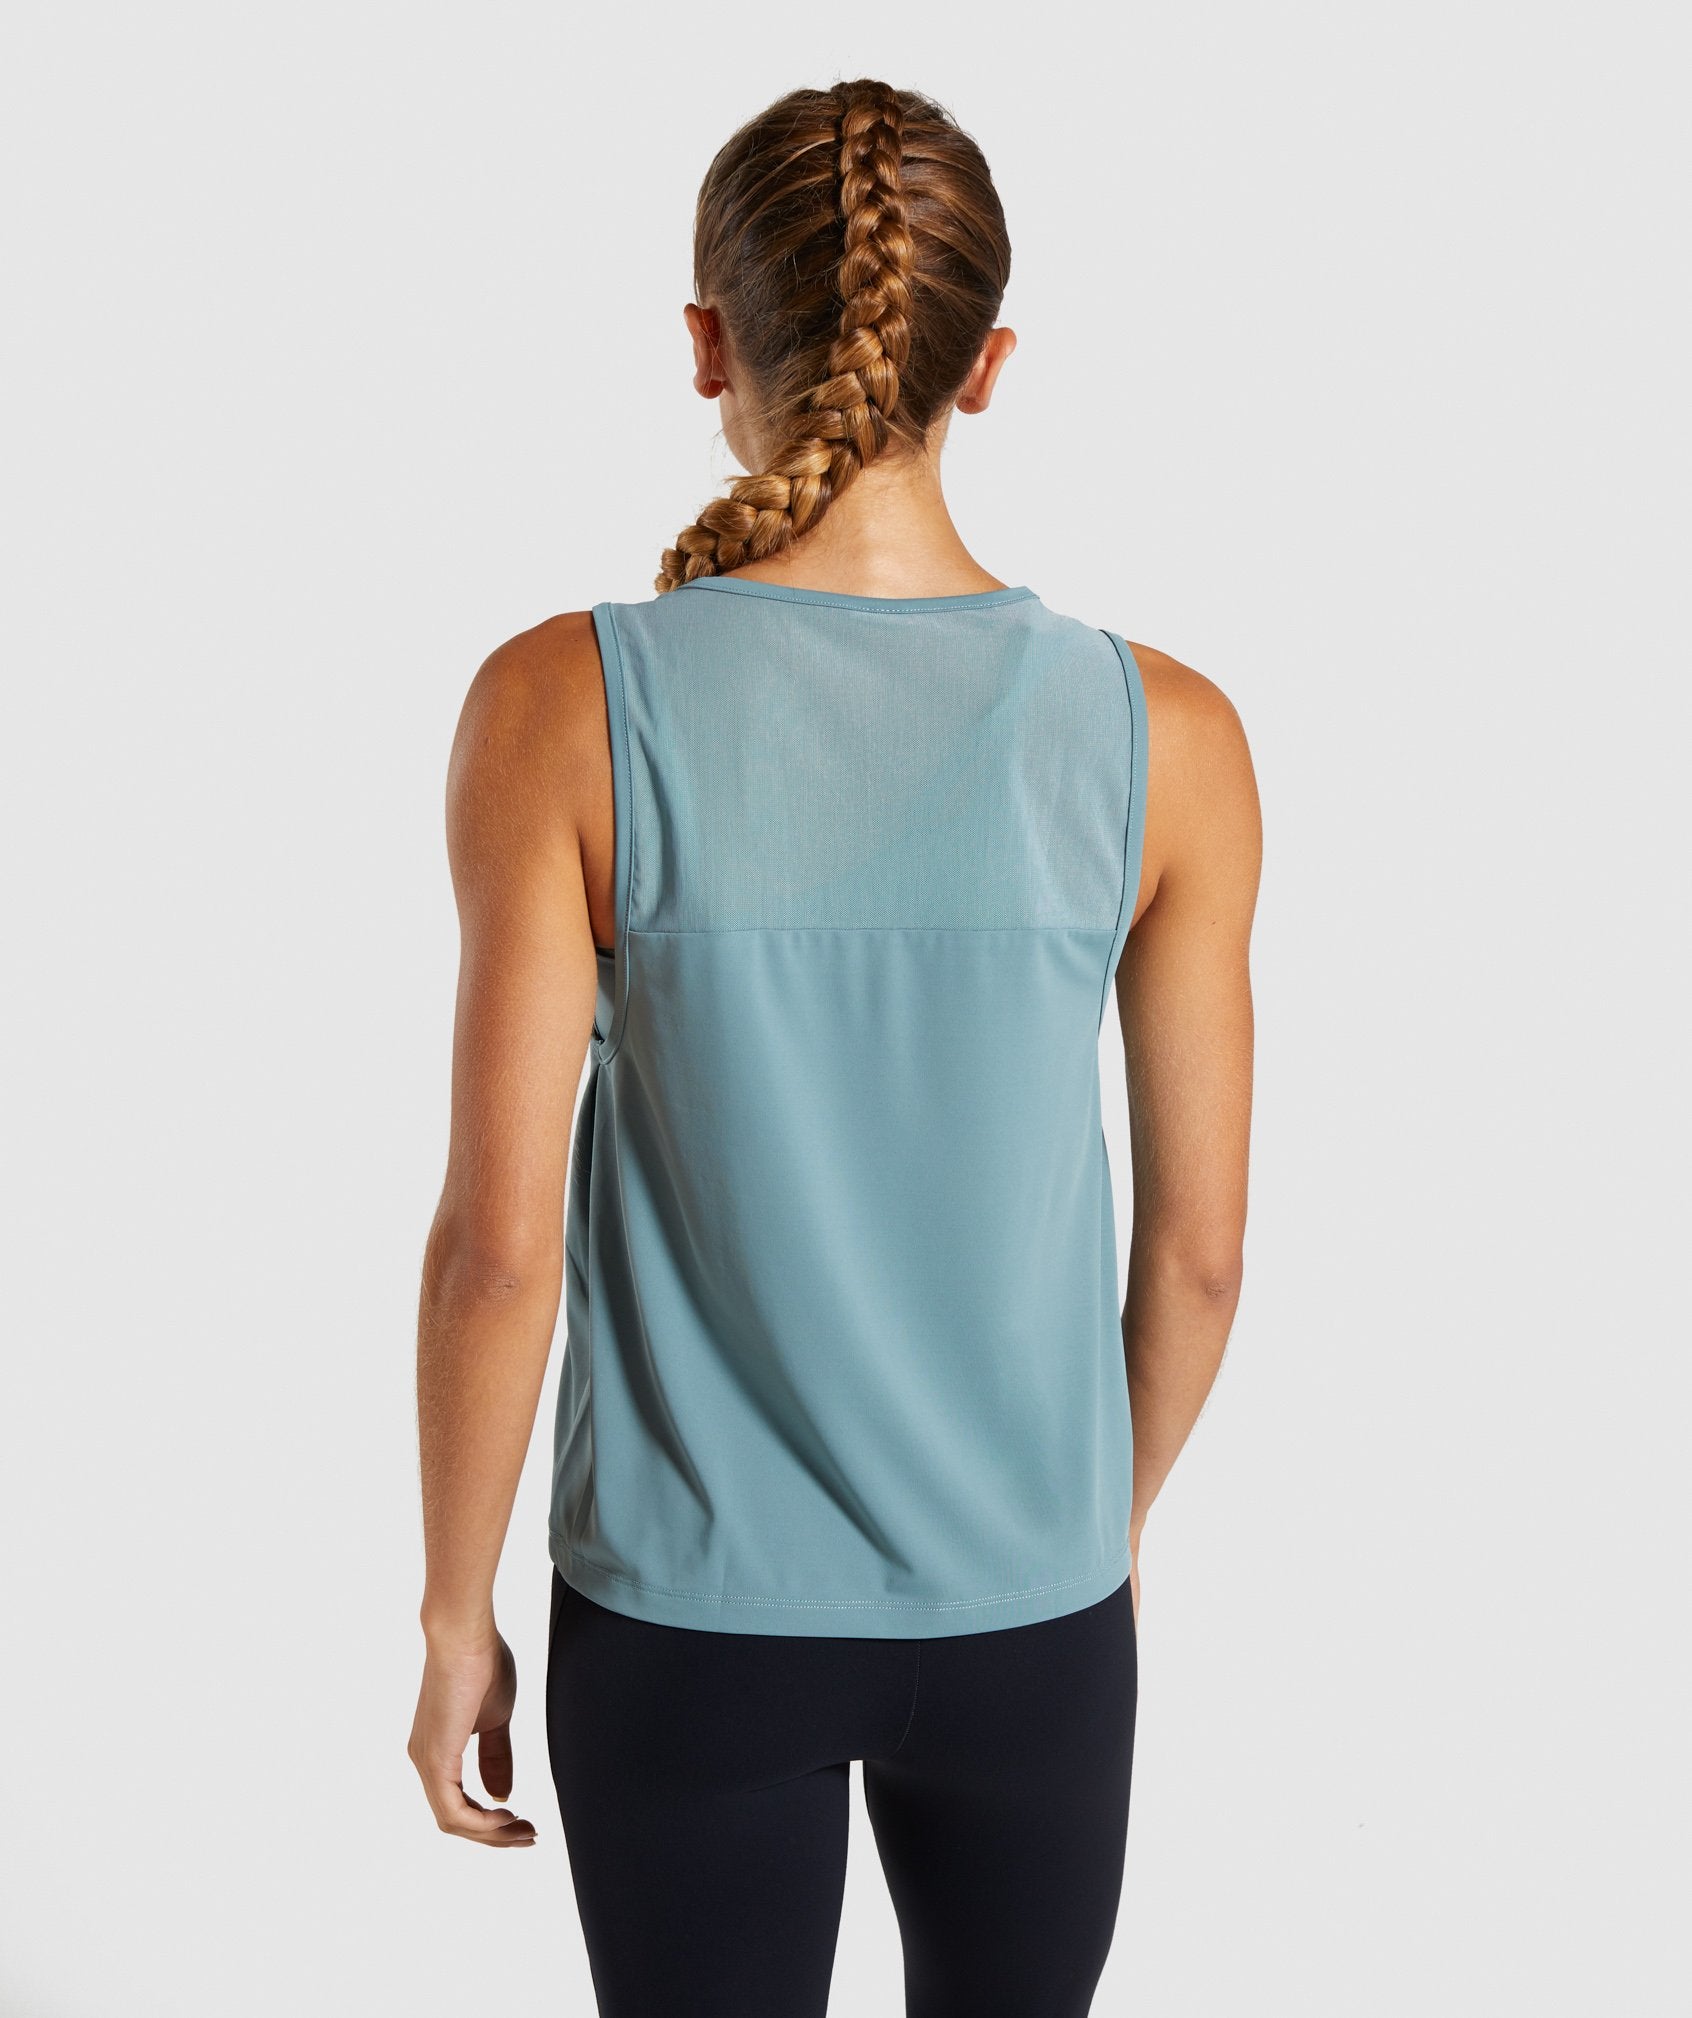 Captivate Two in One Tank in Turquoise - view 2